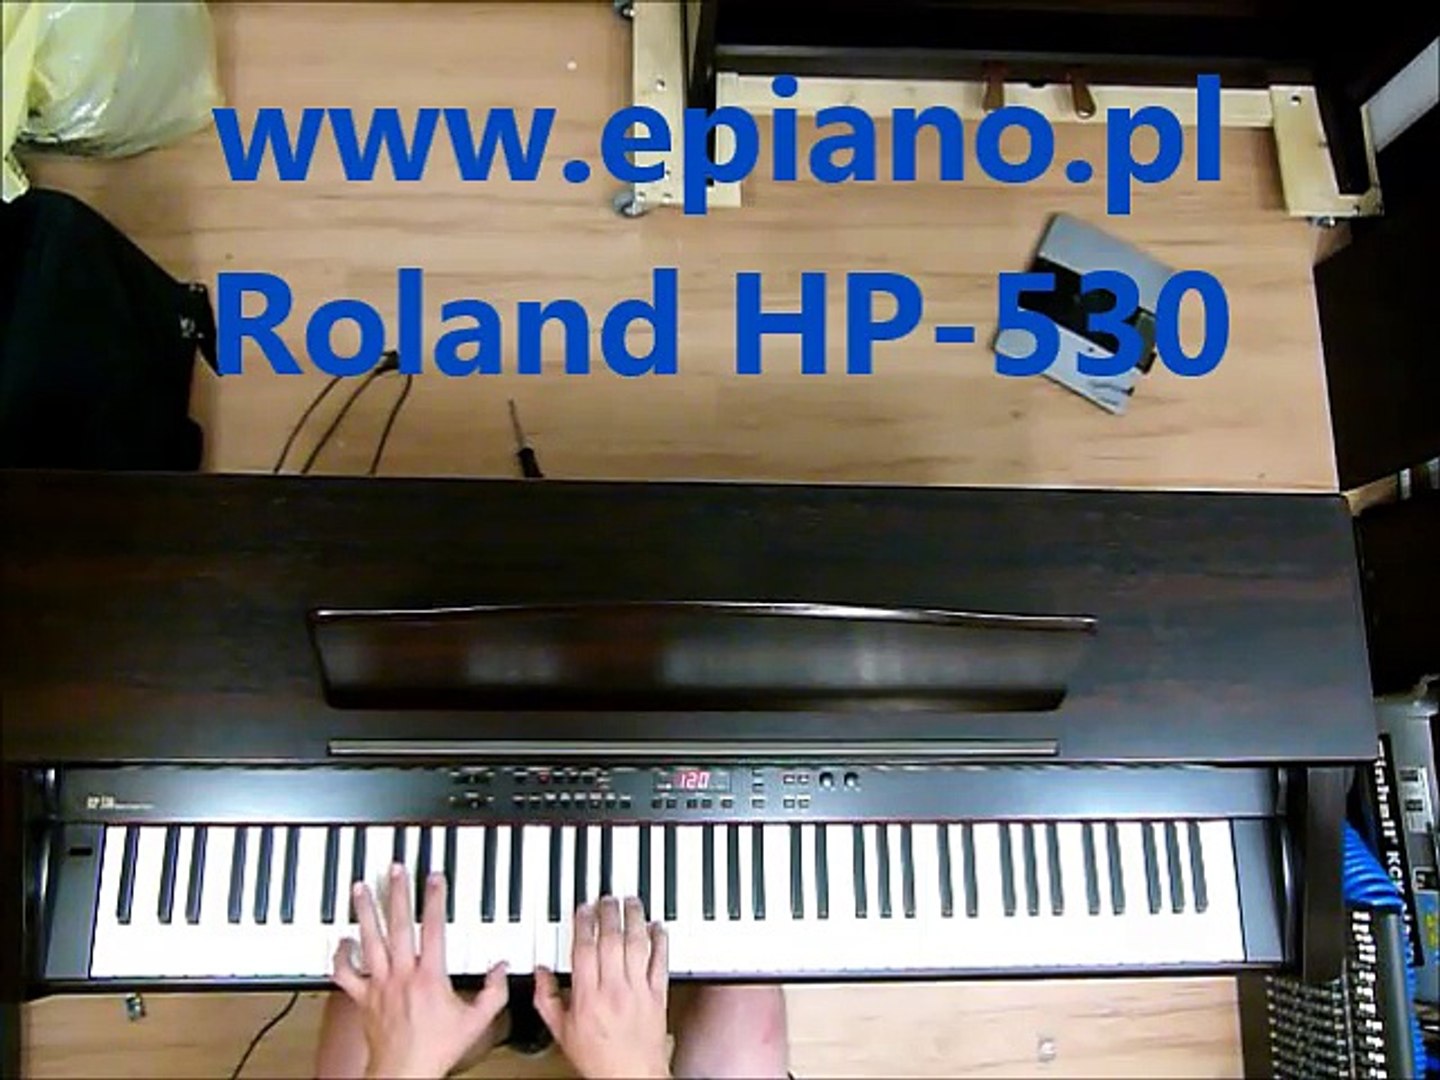 Roland HP-530 - video Dailymotion